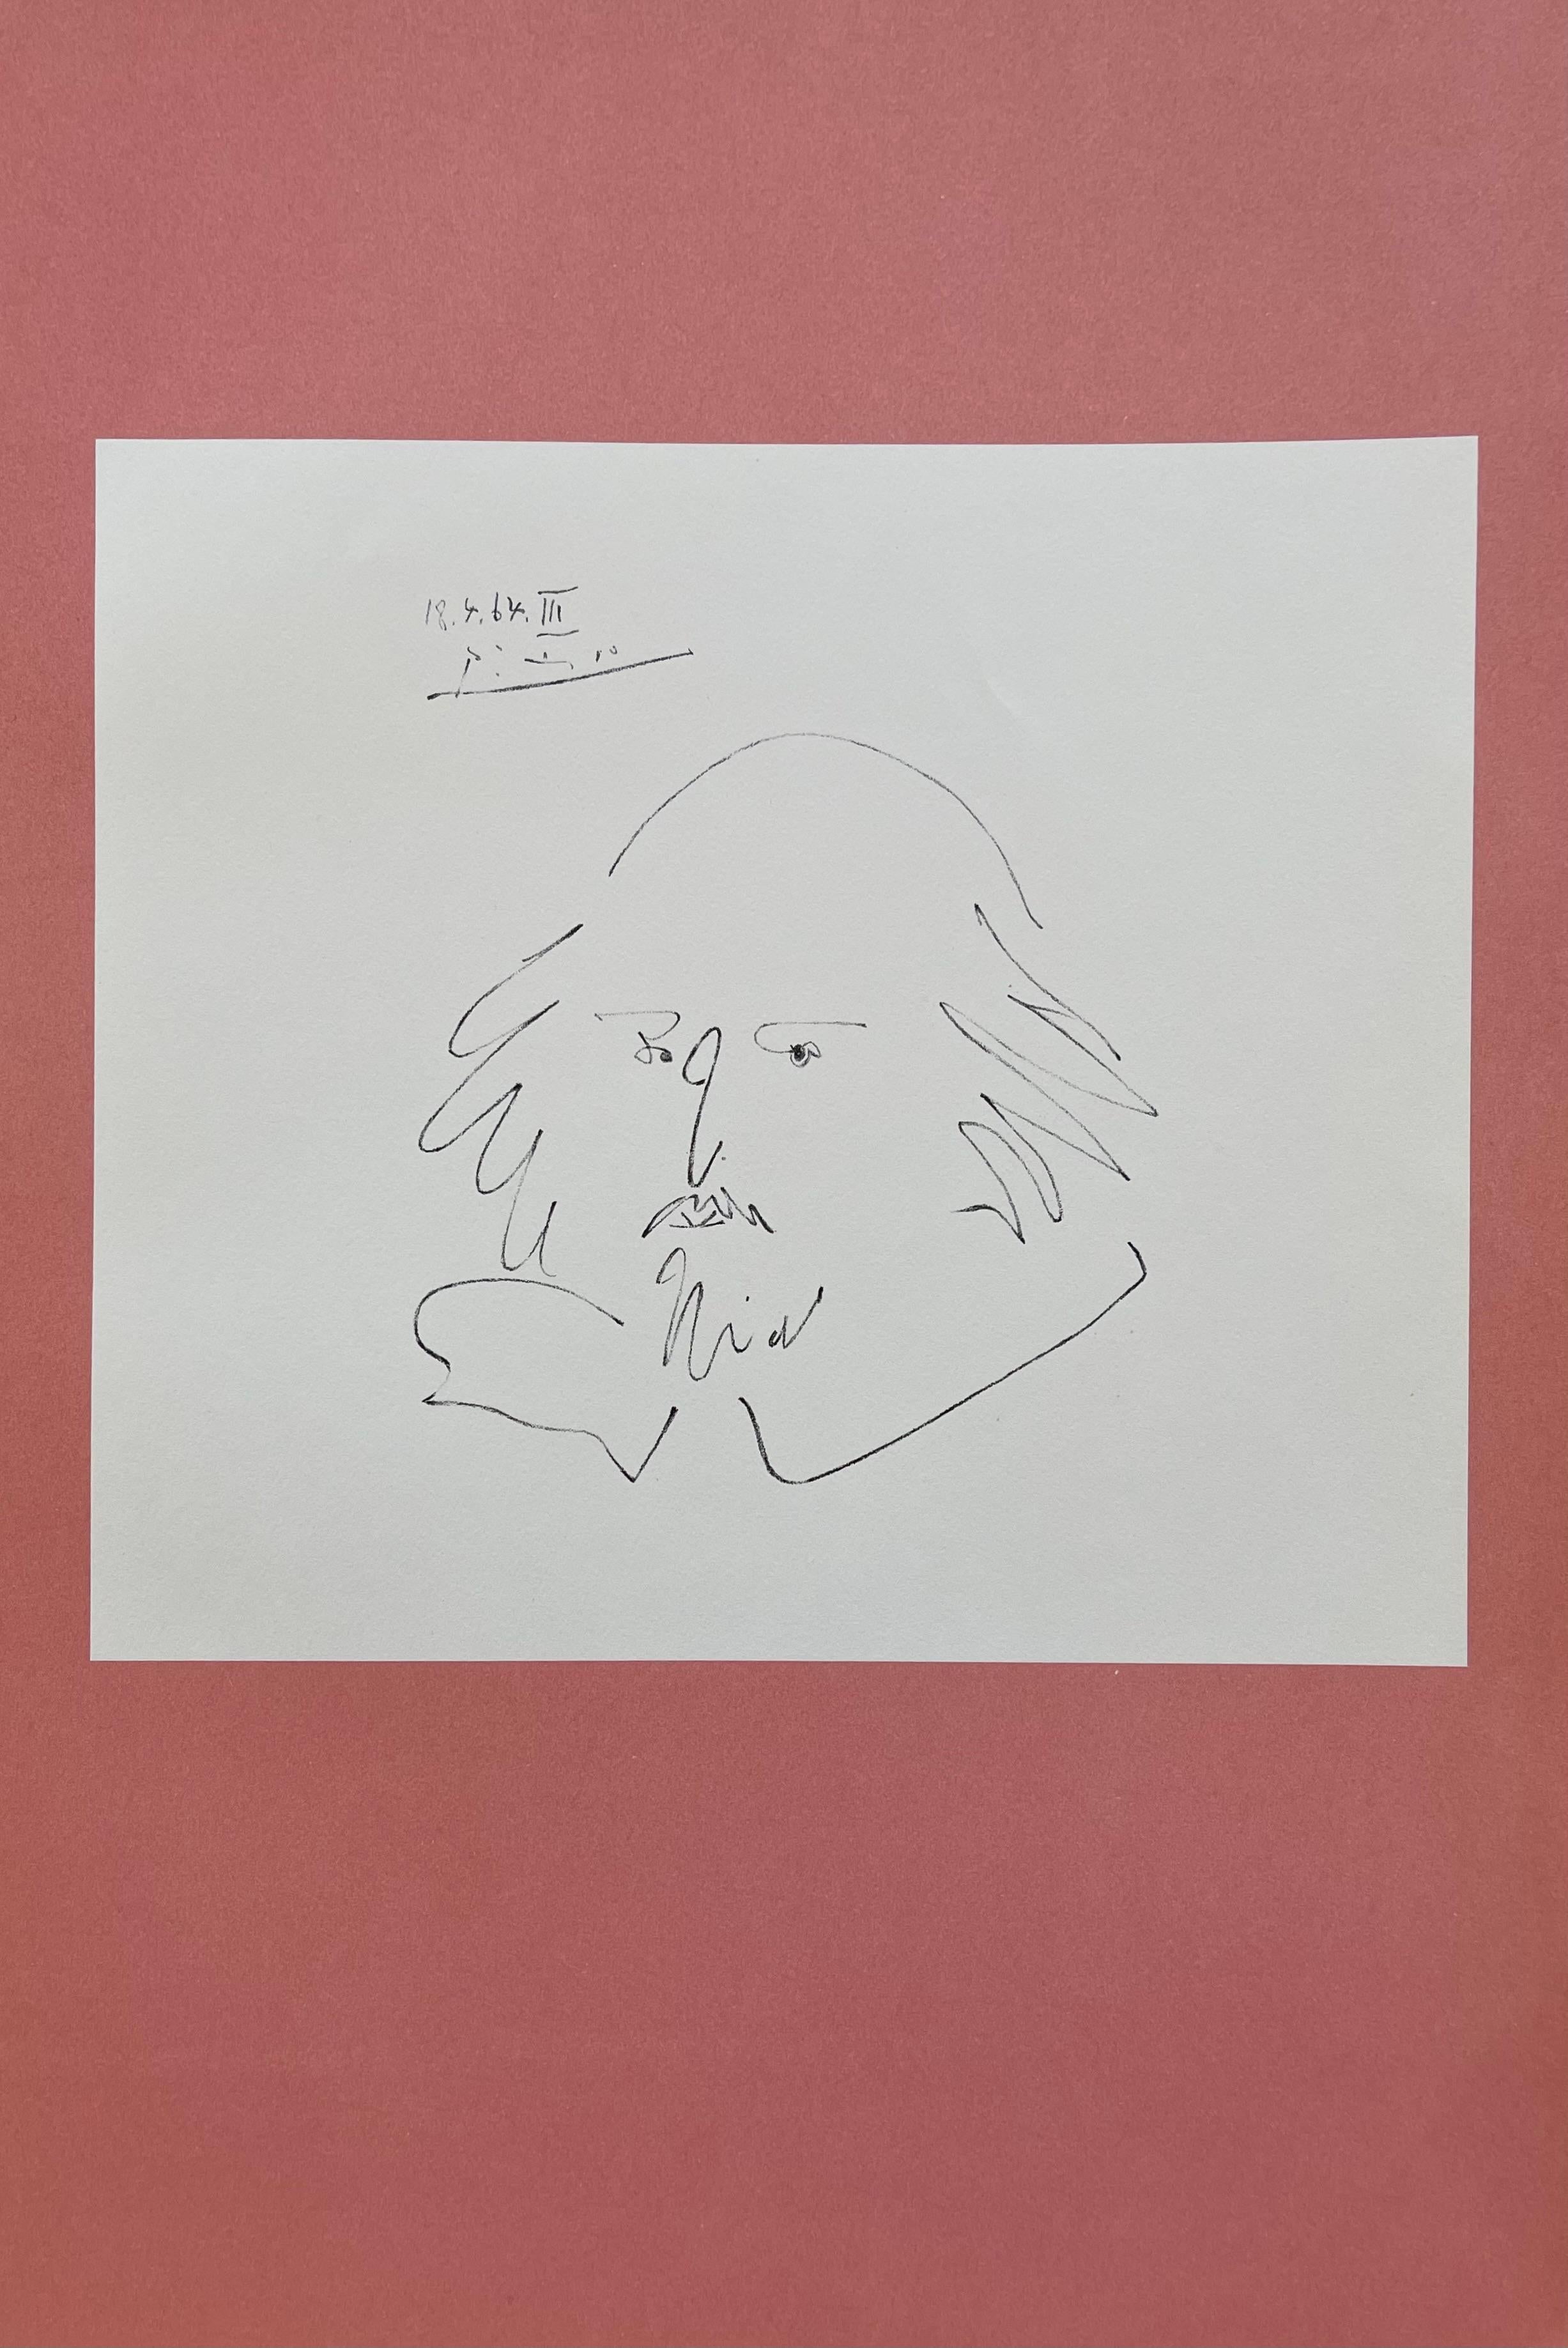 Original Edition Lithograph on wove paper. Signed in the plate and unnumbered, as issued. Good Condition. Notes: From the volume, Picasso-Aragon Shakespeare, 1965. Published by Harry N. Abrams, Inc., New York; printed by Editions Cercle d'Art,